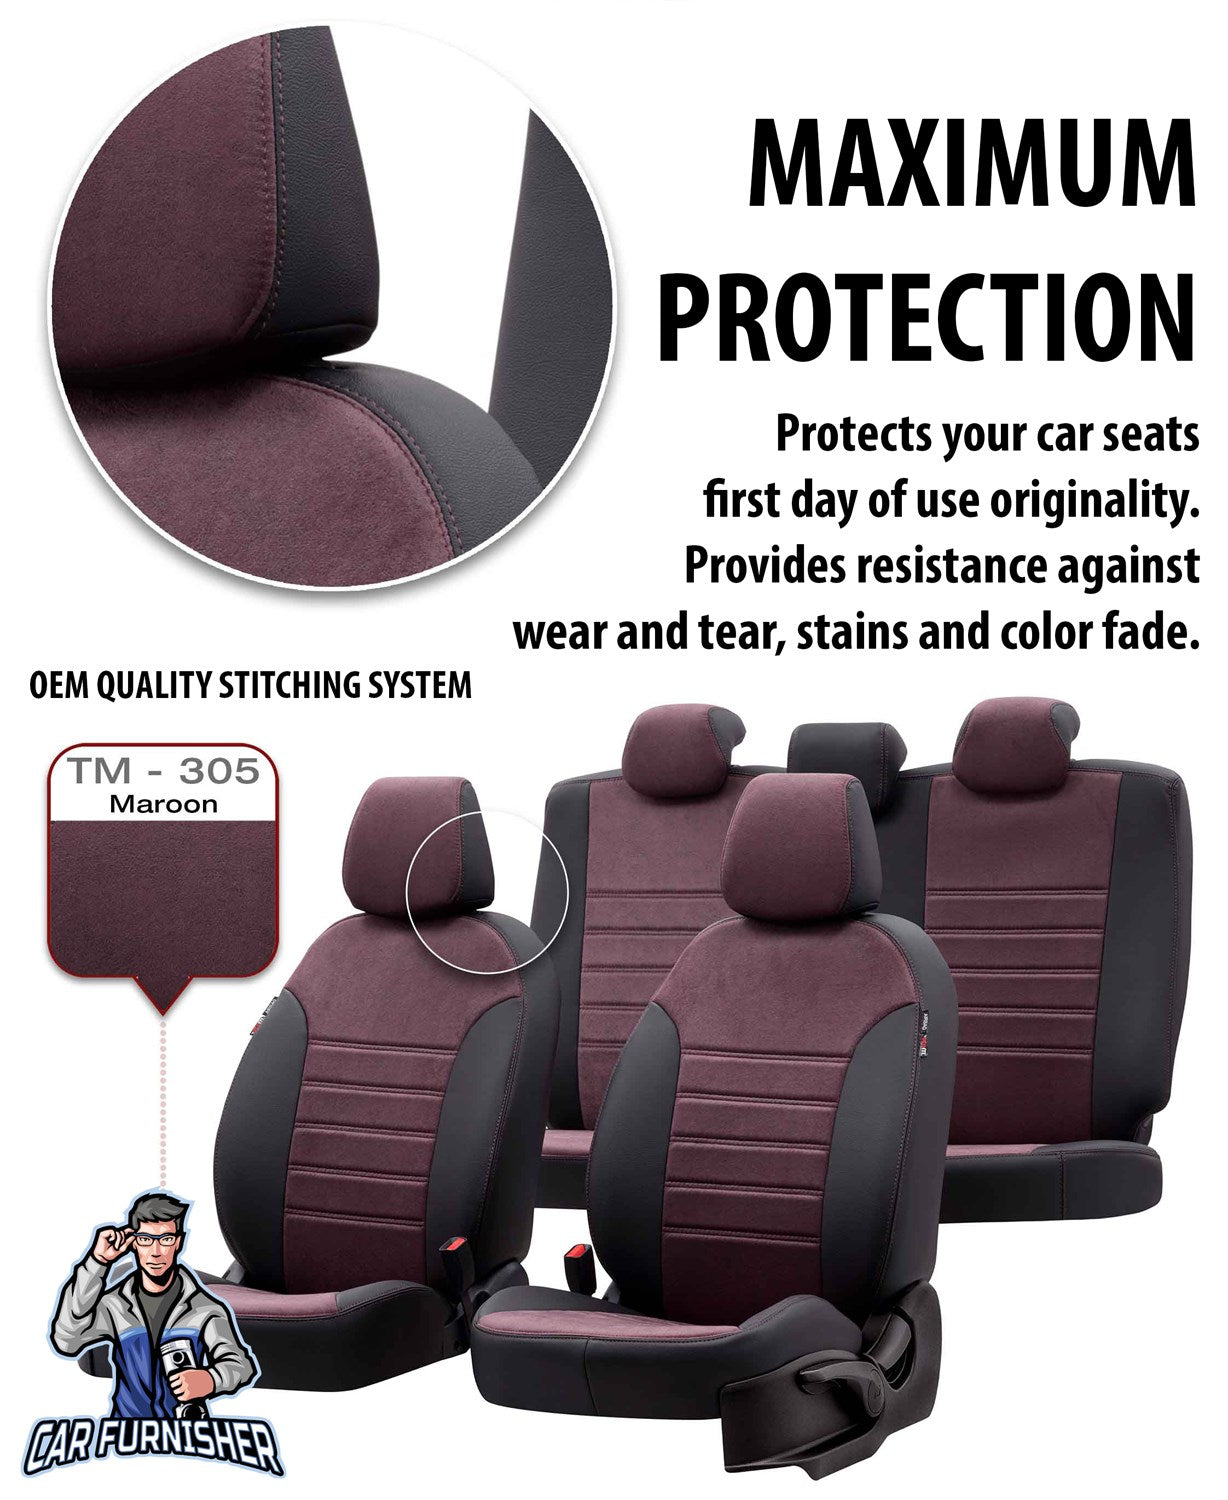 Toyota CHR Seat Cover Milano Suede Design Burgundy Leather & Suede Fabric